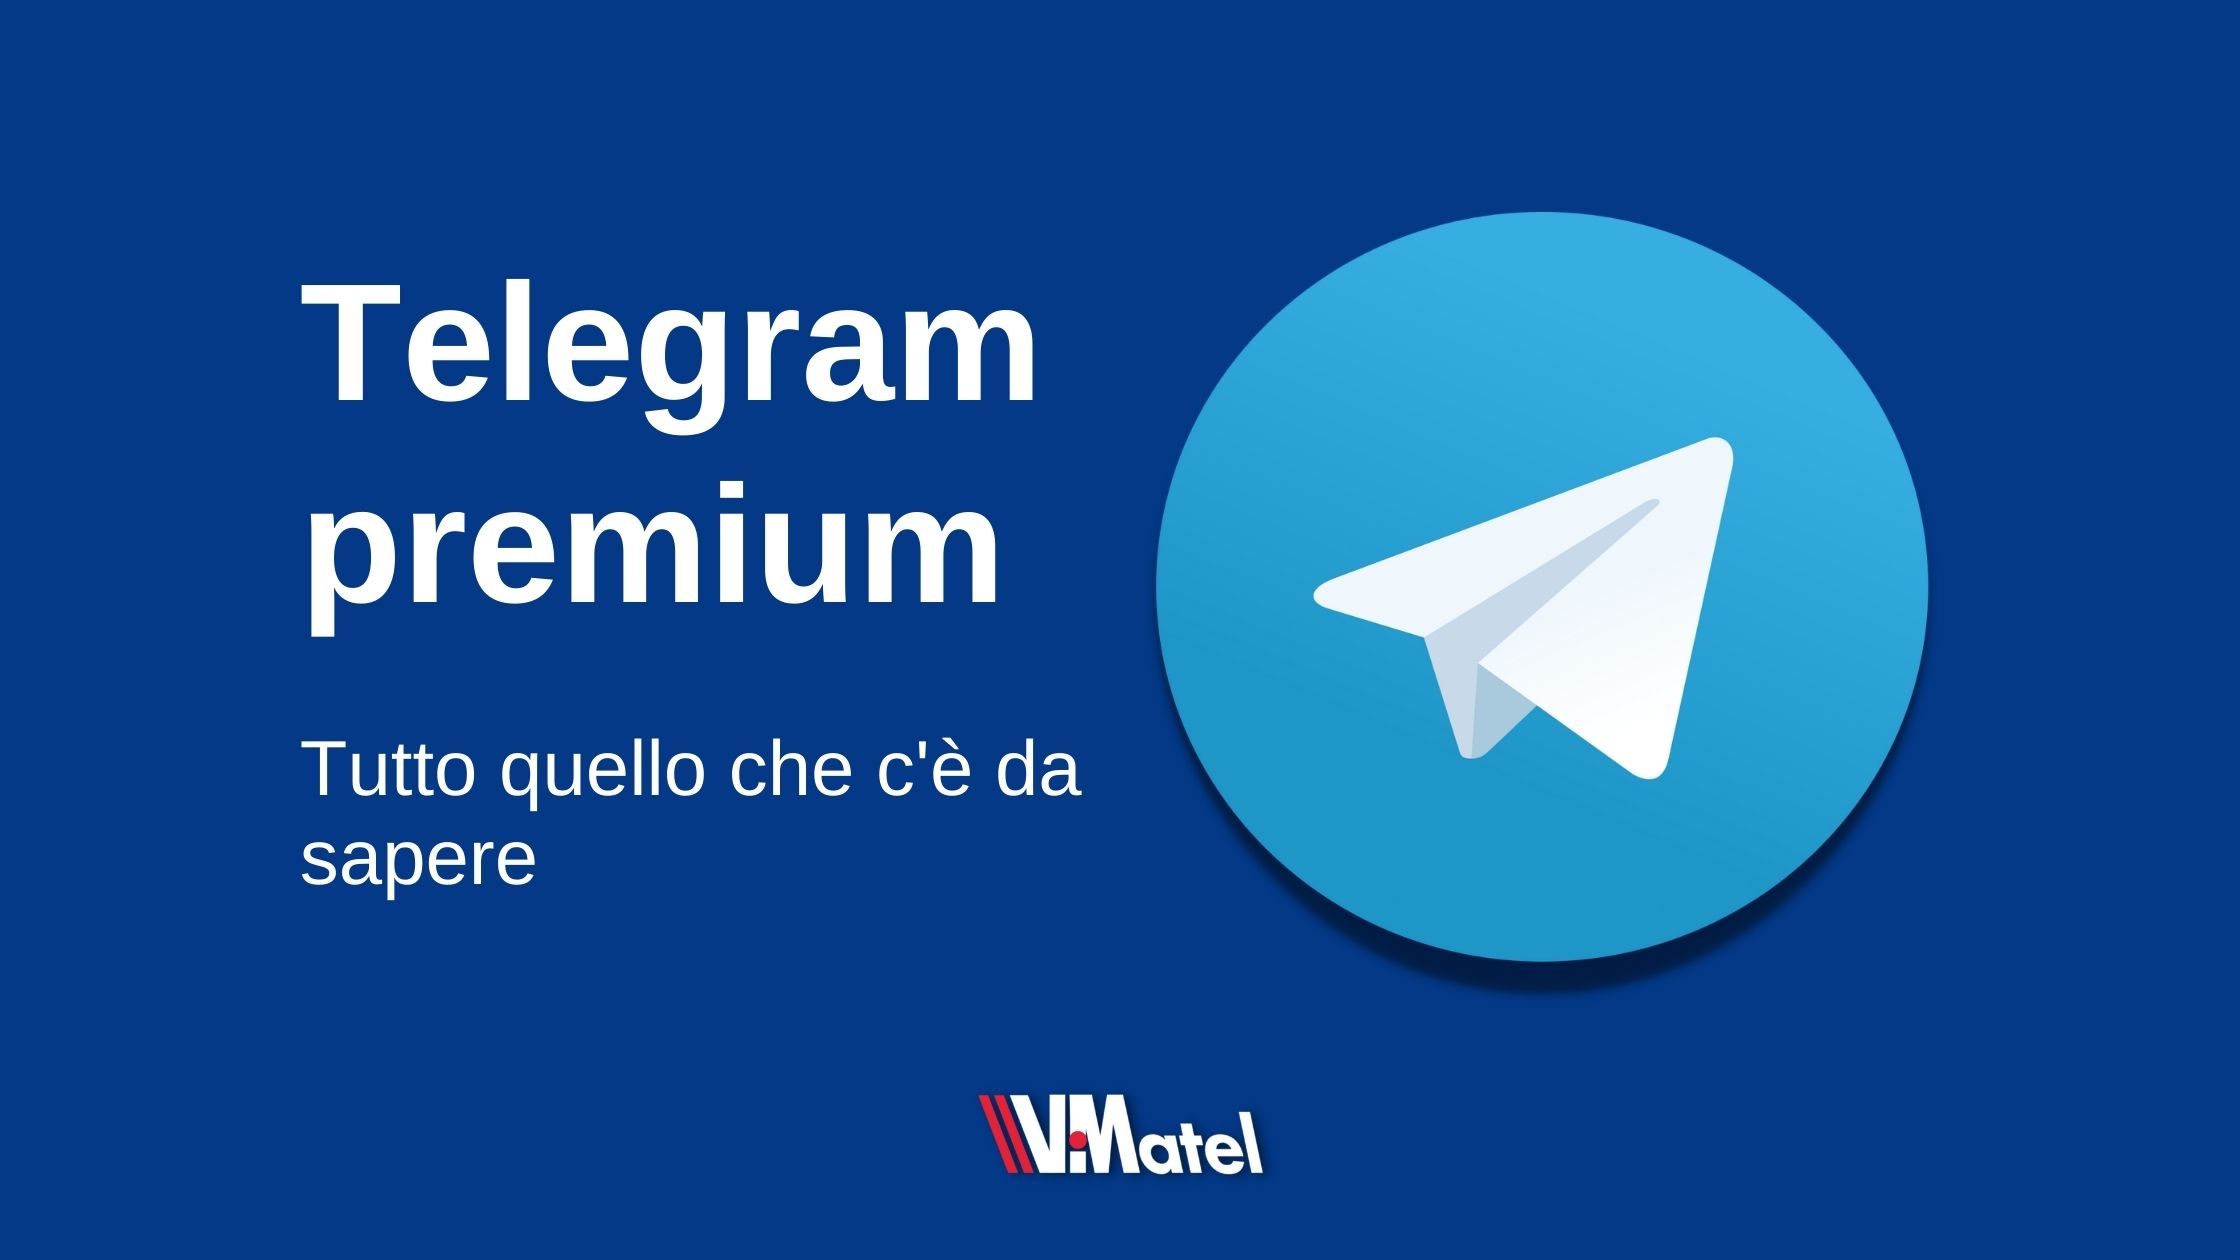 Telegram Premium since the end of November, everything you need to know